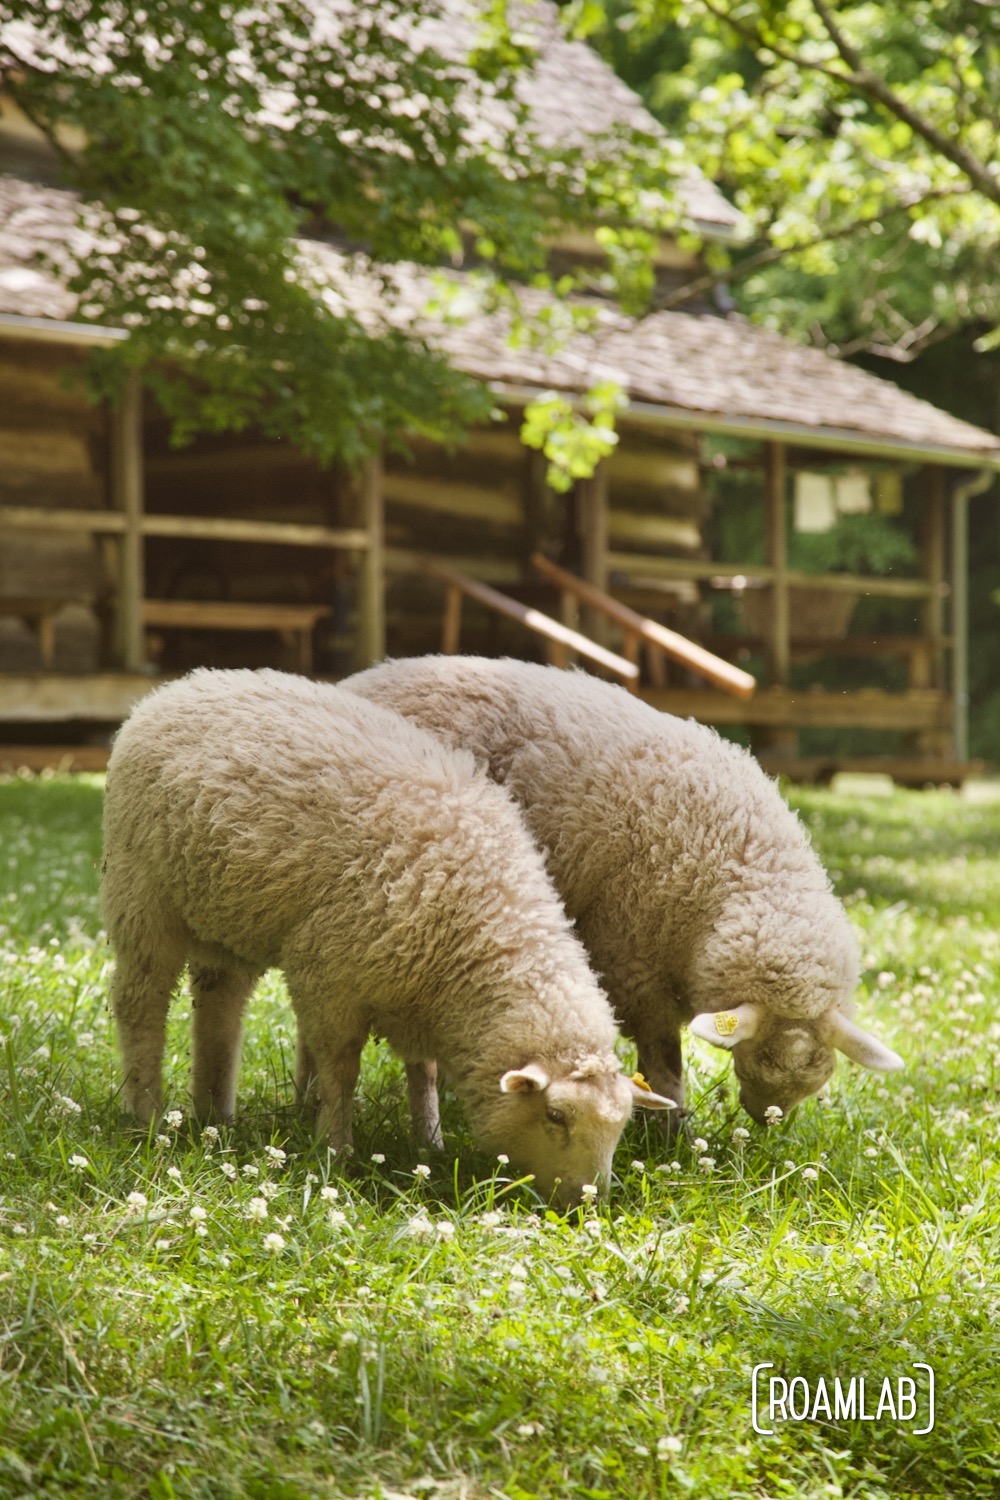 Grazing sheep in front of the Double Pen House at Homeplace 1850s Working Farm and Living History Museum.